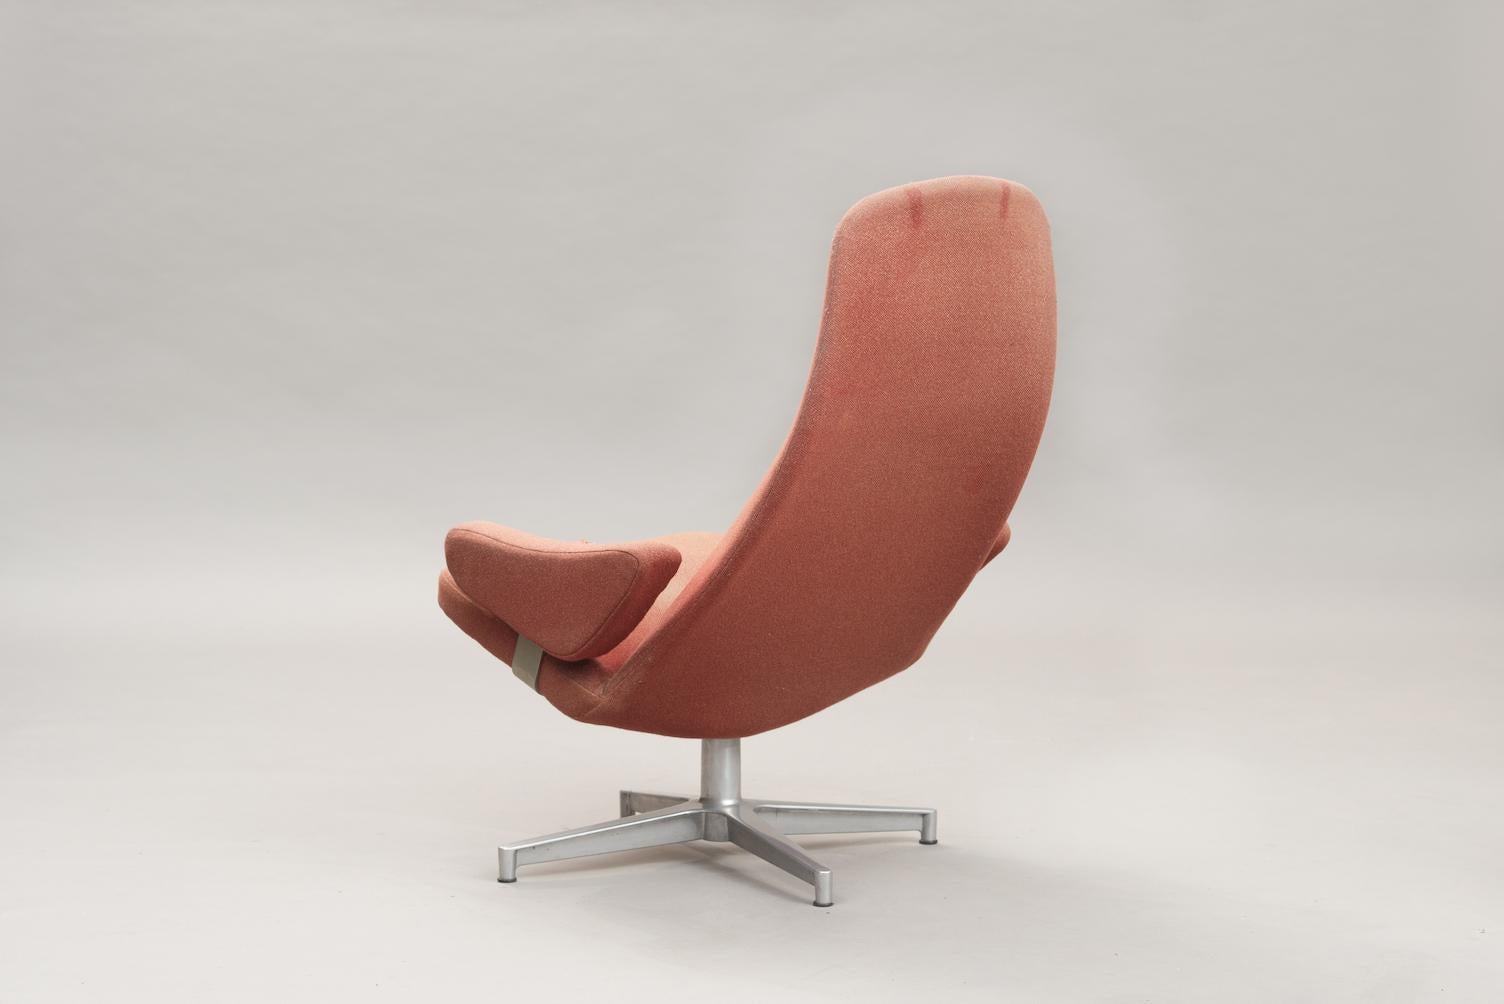 Mid-Century Modern 'Contourett Roto' swivel chair, aluminium base.
This item is in original condition, can be sold as it is or fully restored, the price shown is in original condition.